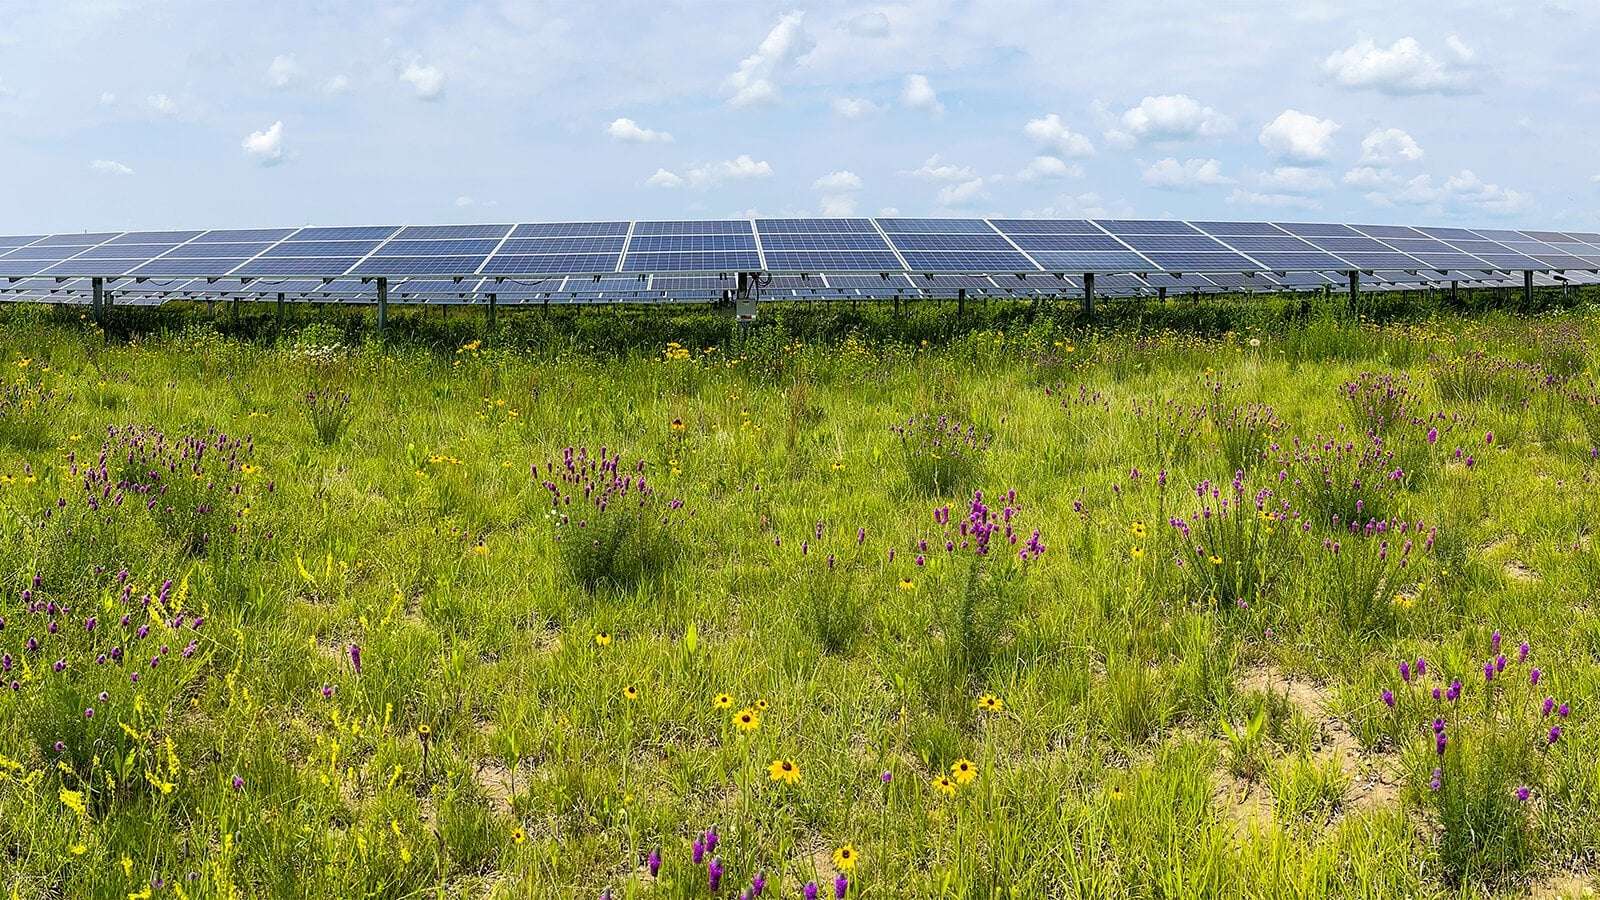 image for Insect populations flourish in the restored habitats of solar energy facilities